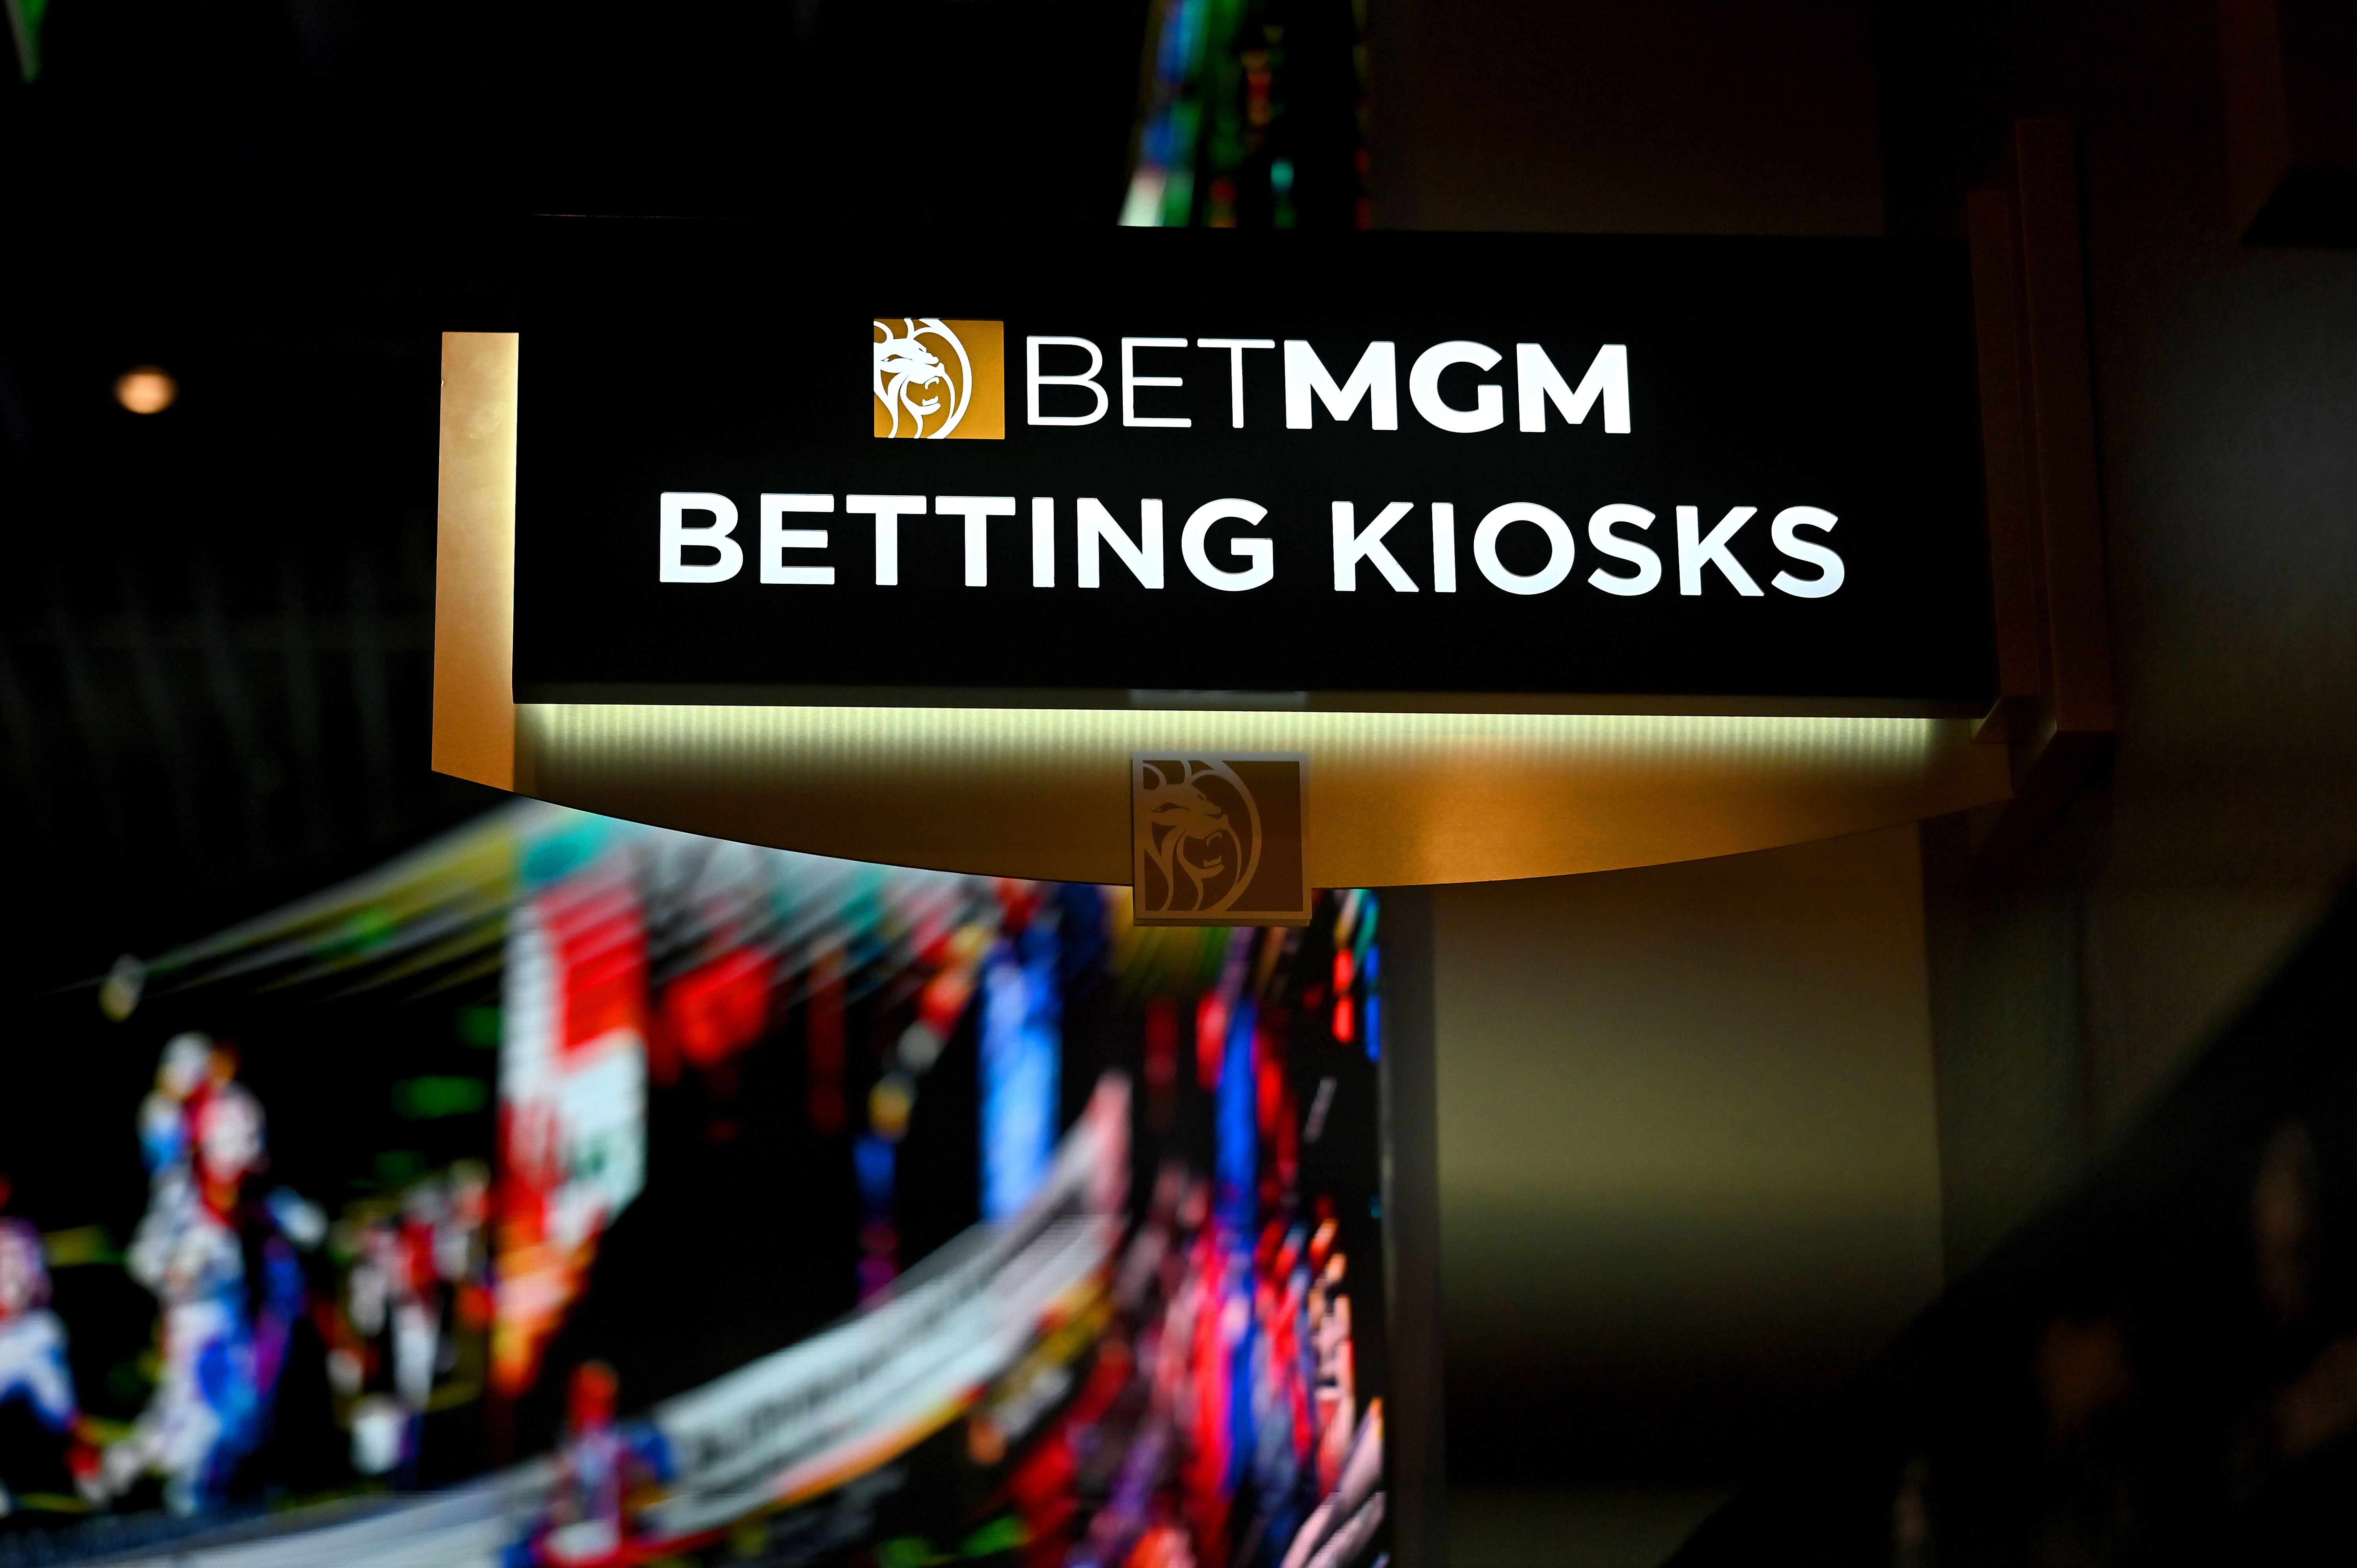 MGM National Harbor, Governor Larry Hogan And Joe Theismann Launch Sports Betting In Maryland With BETMGM